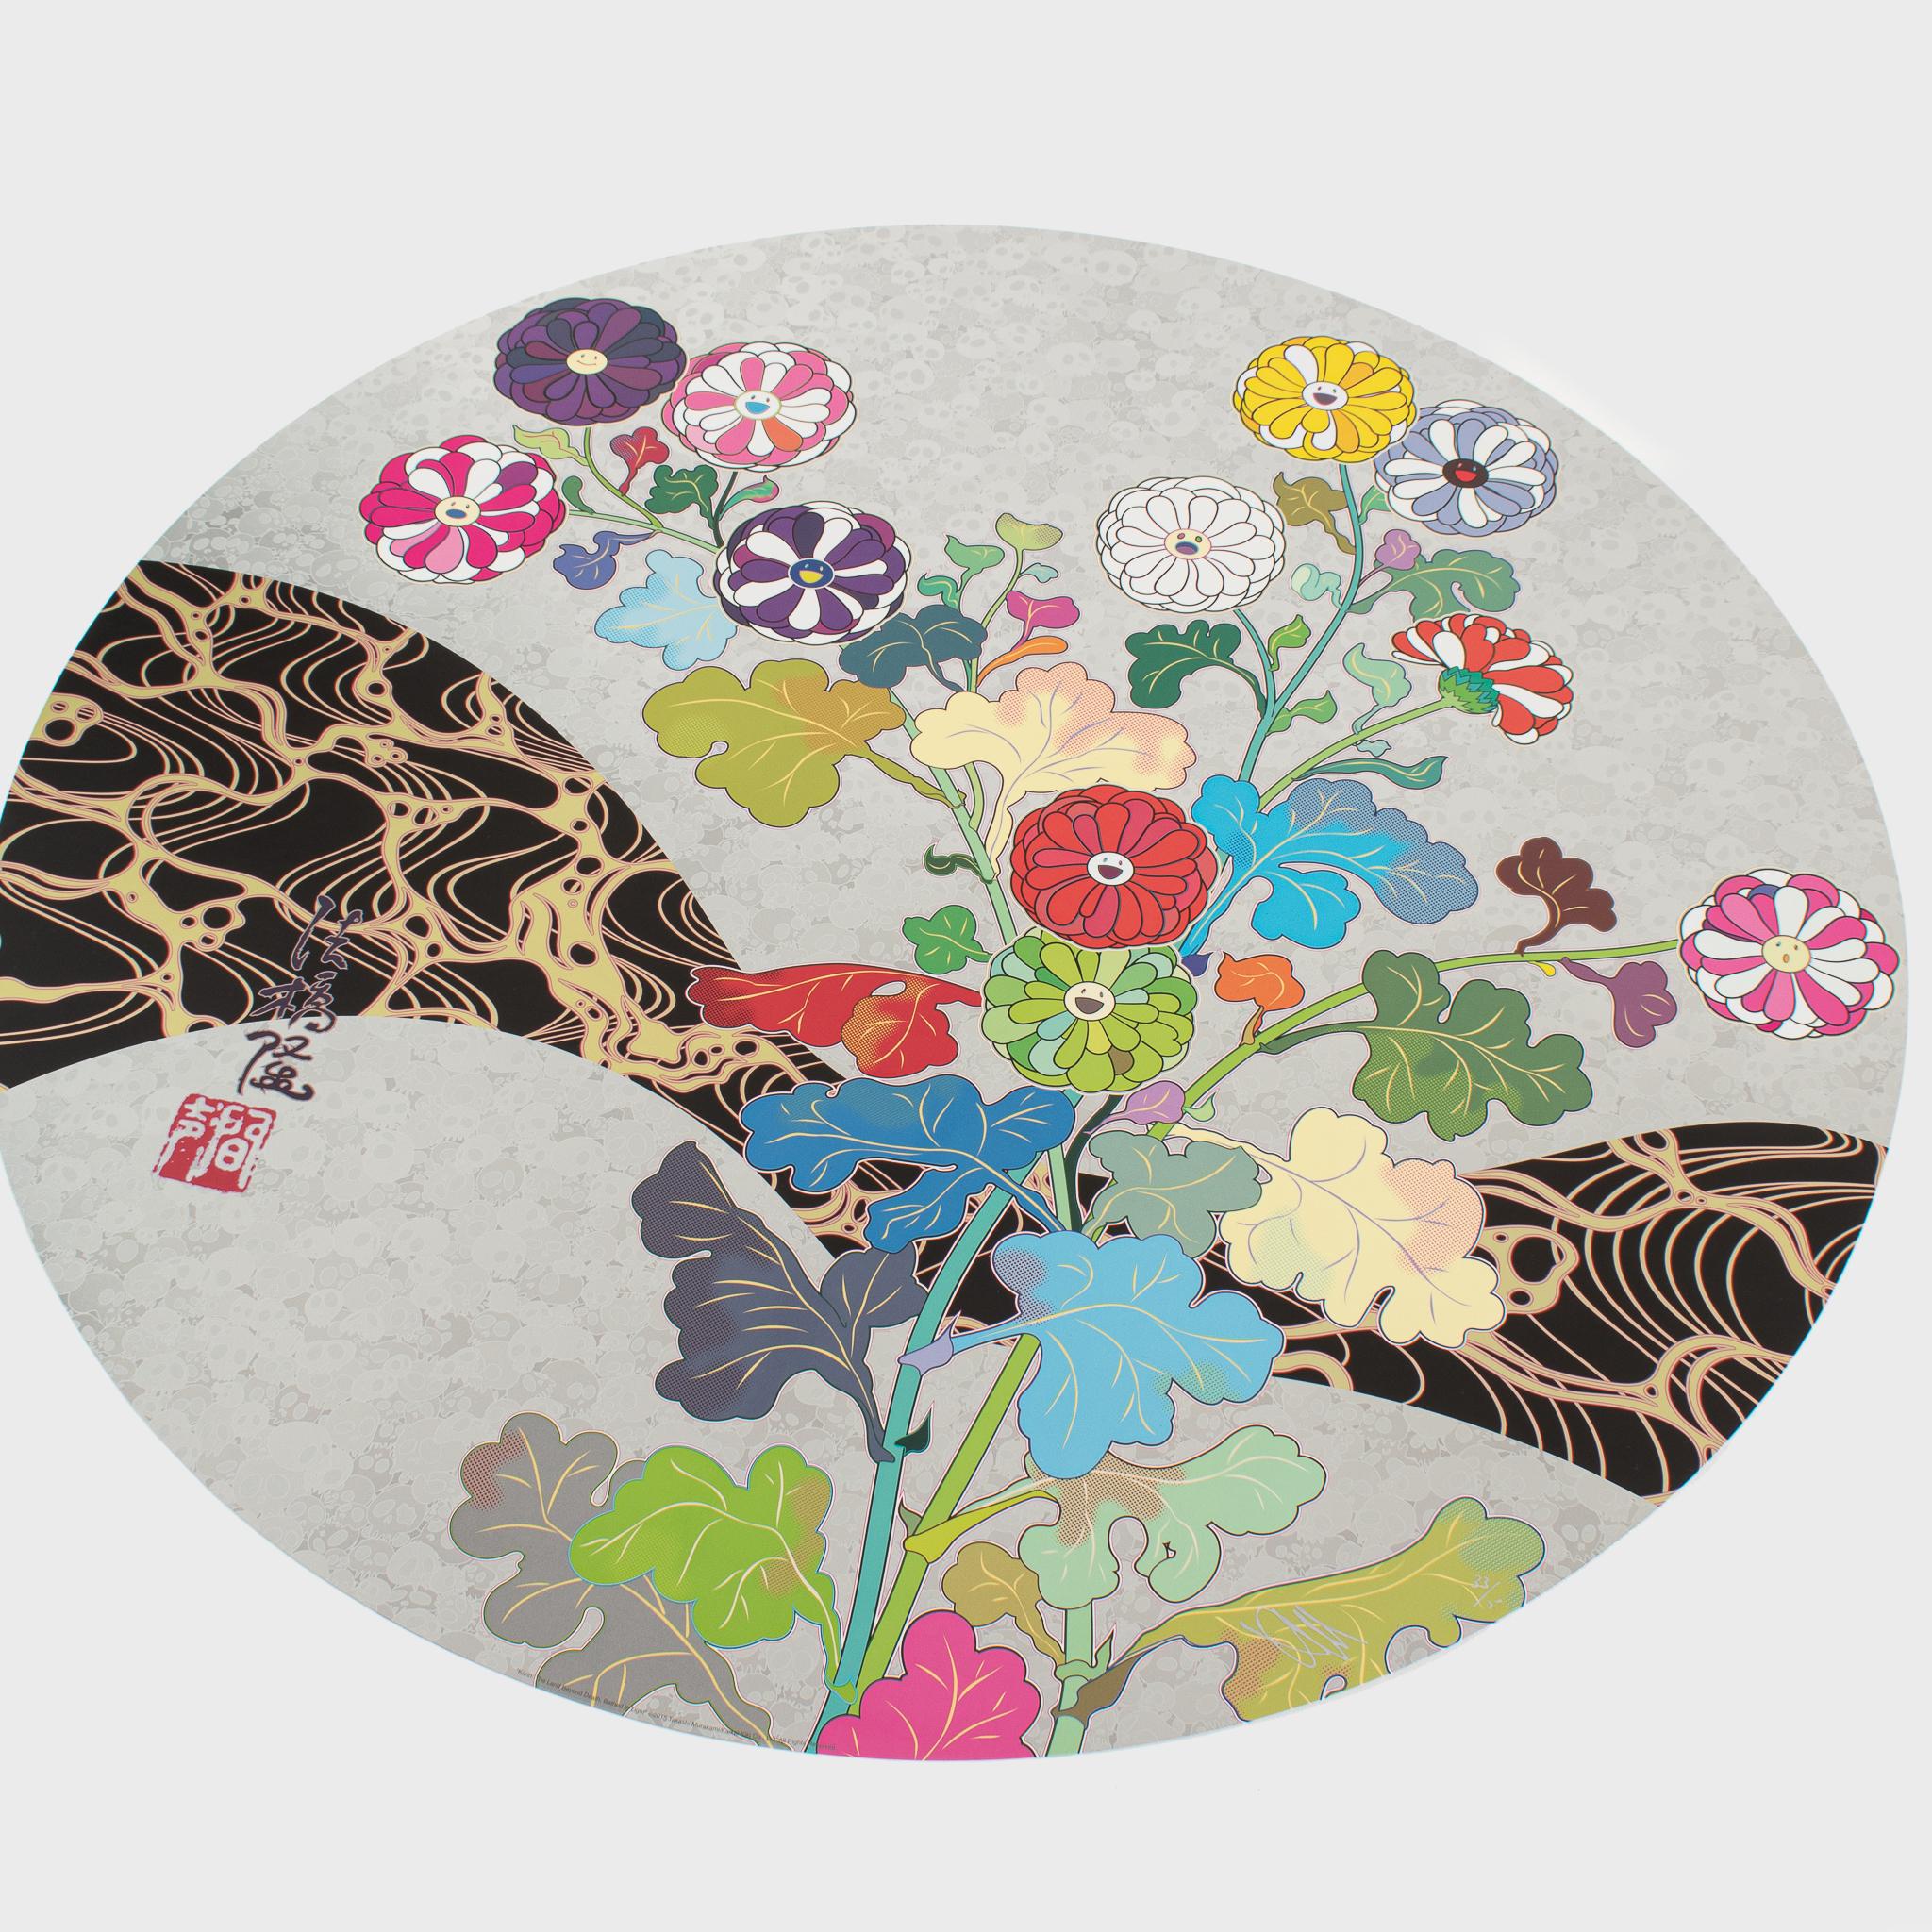 Kōrin: The Land Beyond Death, Bathed in Light - Gray Abstract Print by Takashi Murakami